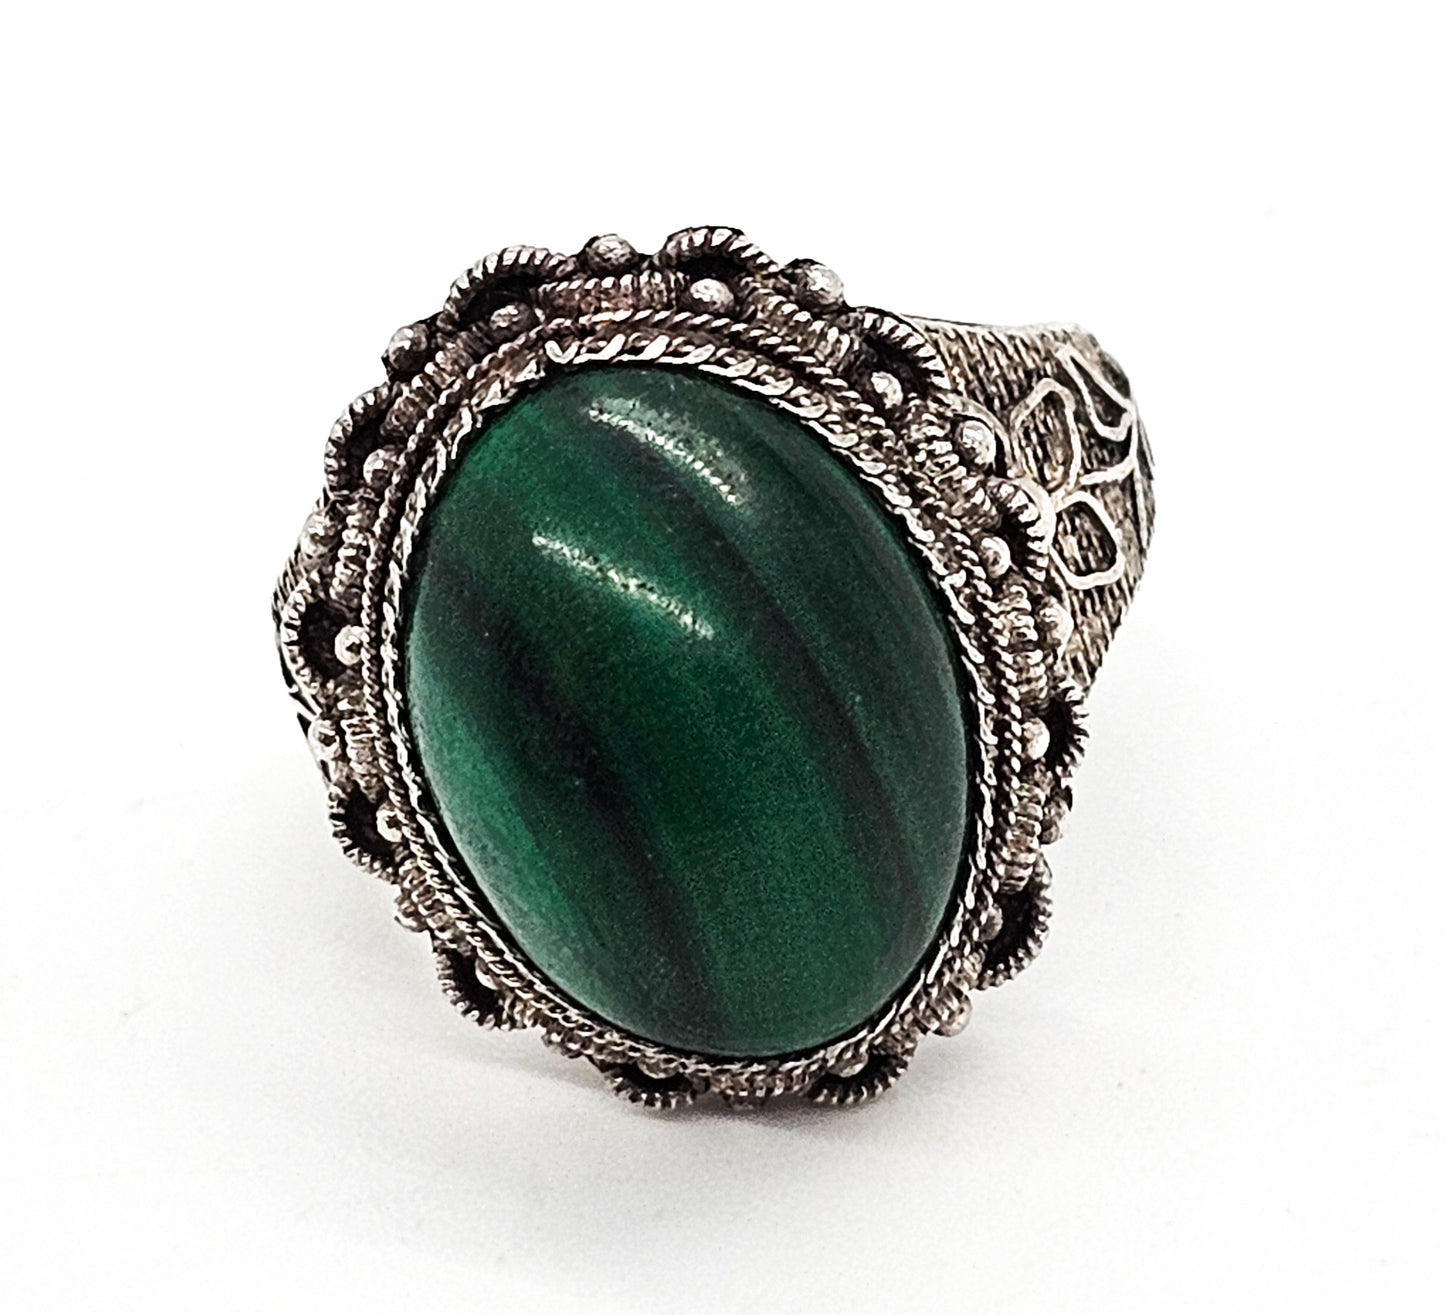 Chinese Export Malachite green gemstone filigree vintage sterling silver ring size 7